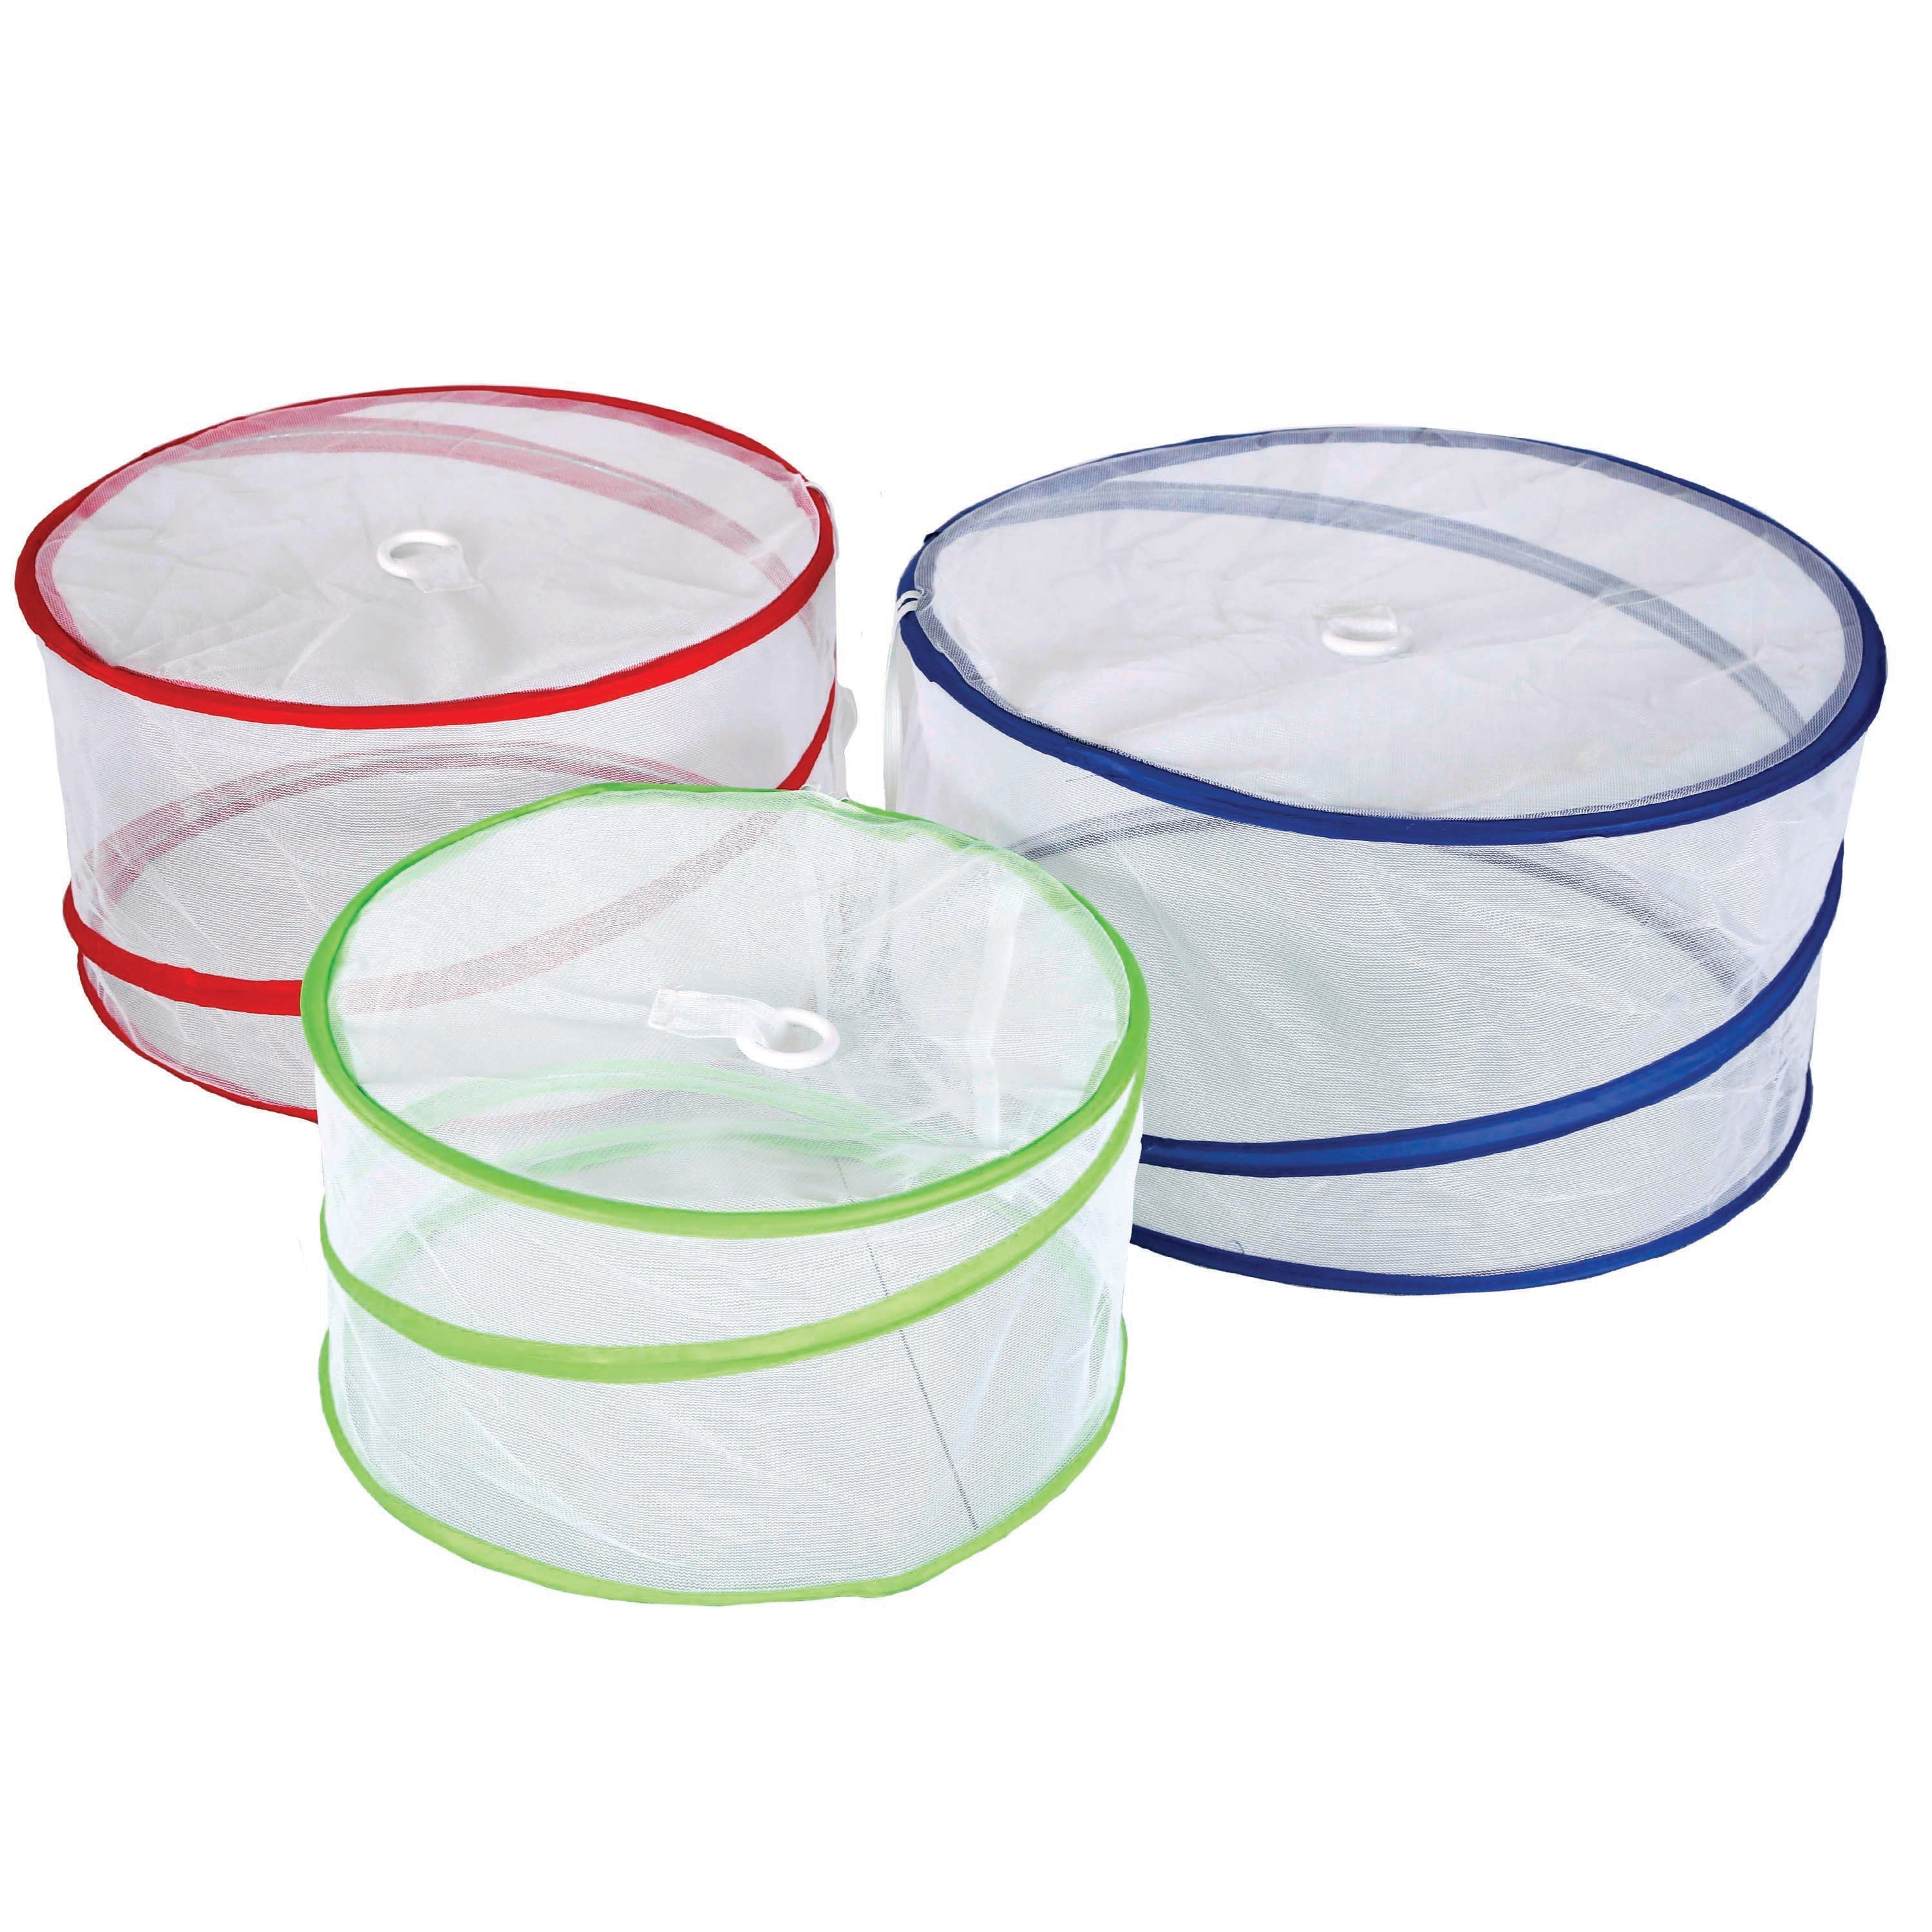 Food Covers - Set Of 3 - 15, 13.75 And 12 In Diameter